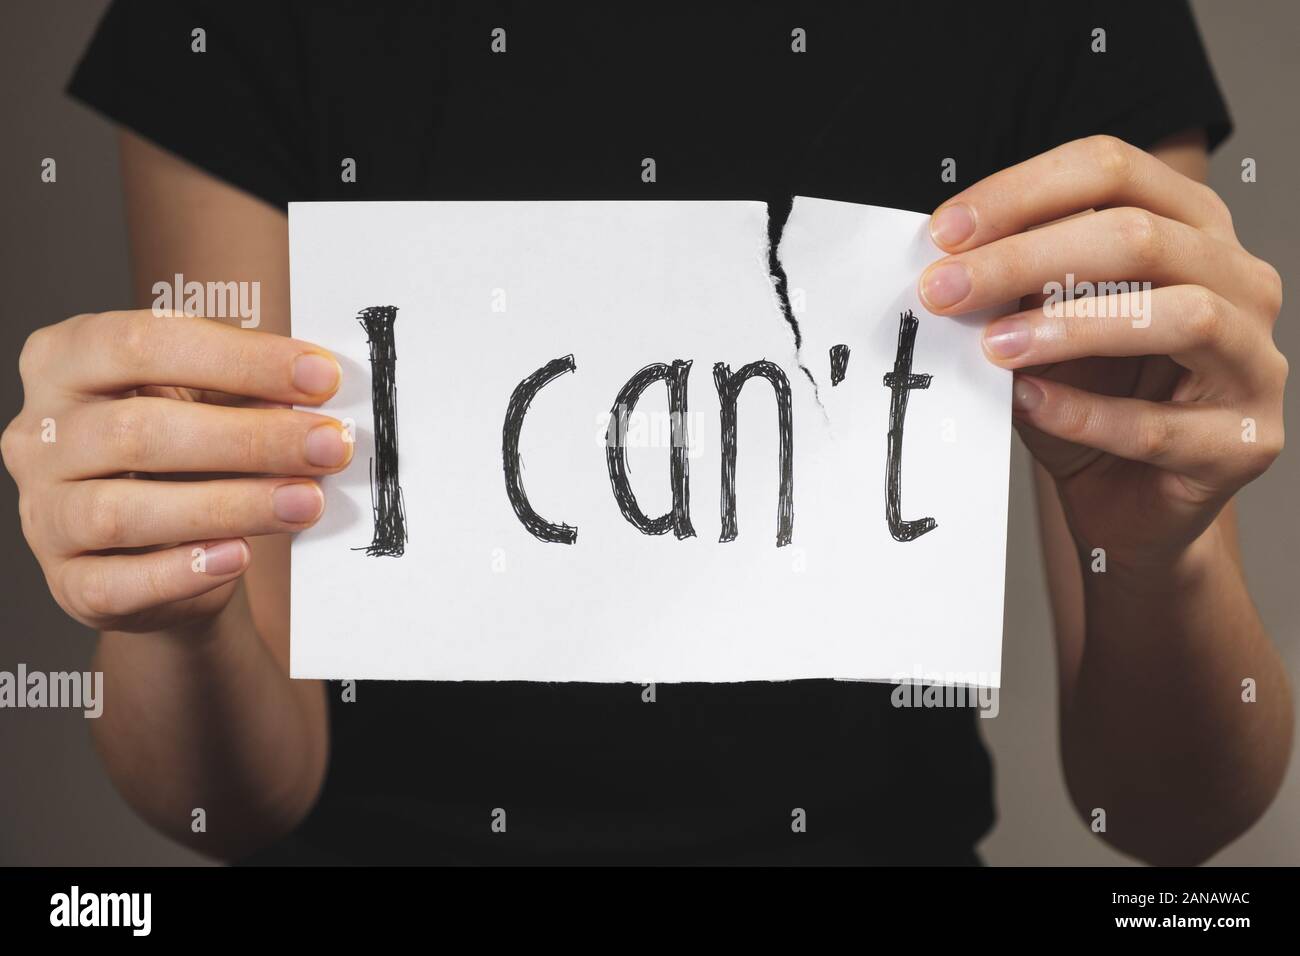 Hands tearing out negation of the 'i can not' sign. Motivational concept of believing in yourself and overriding problems and emotional difficulties Stock Photo